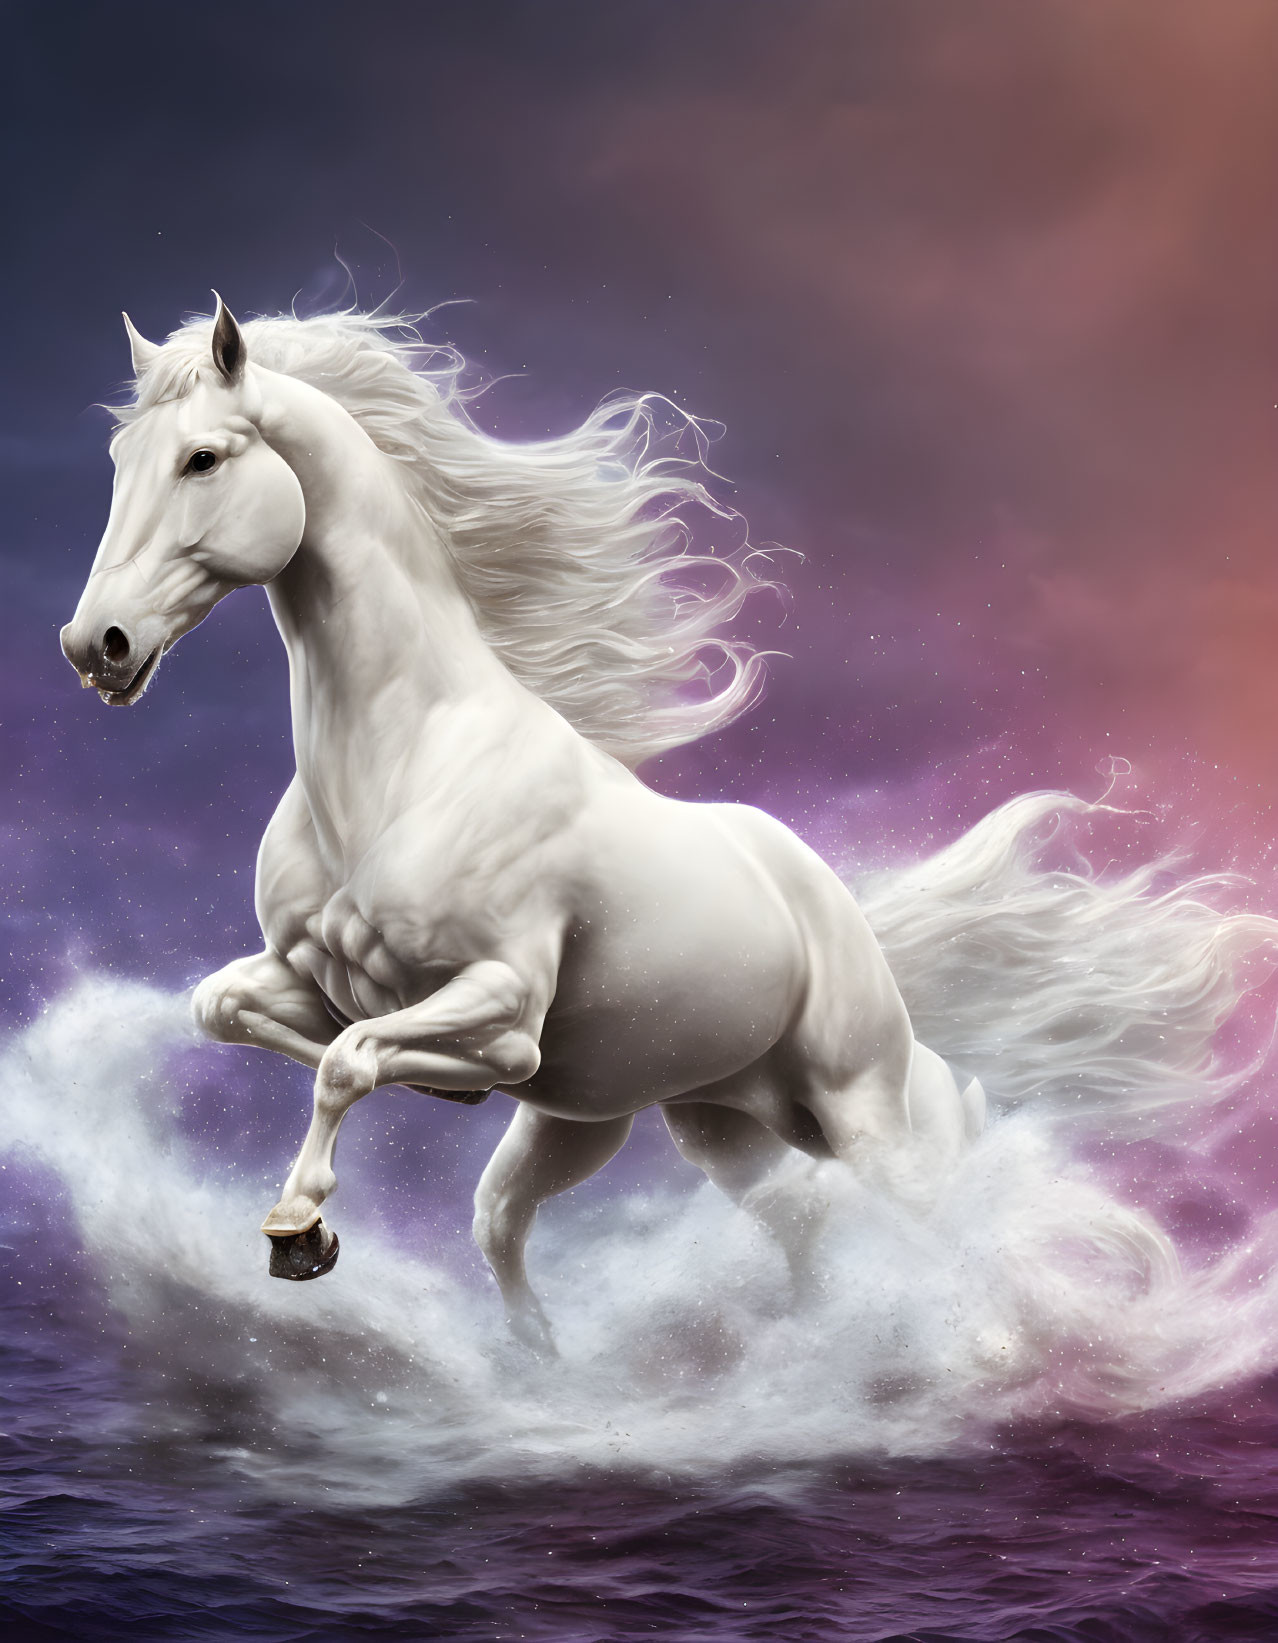 White Horse Galloping Through Purple and Pink Sky